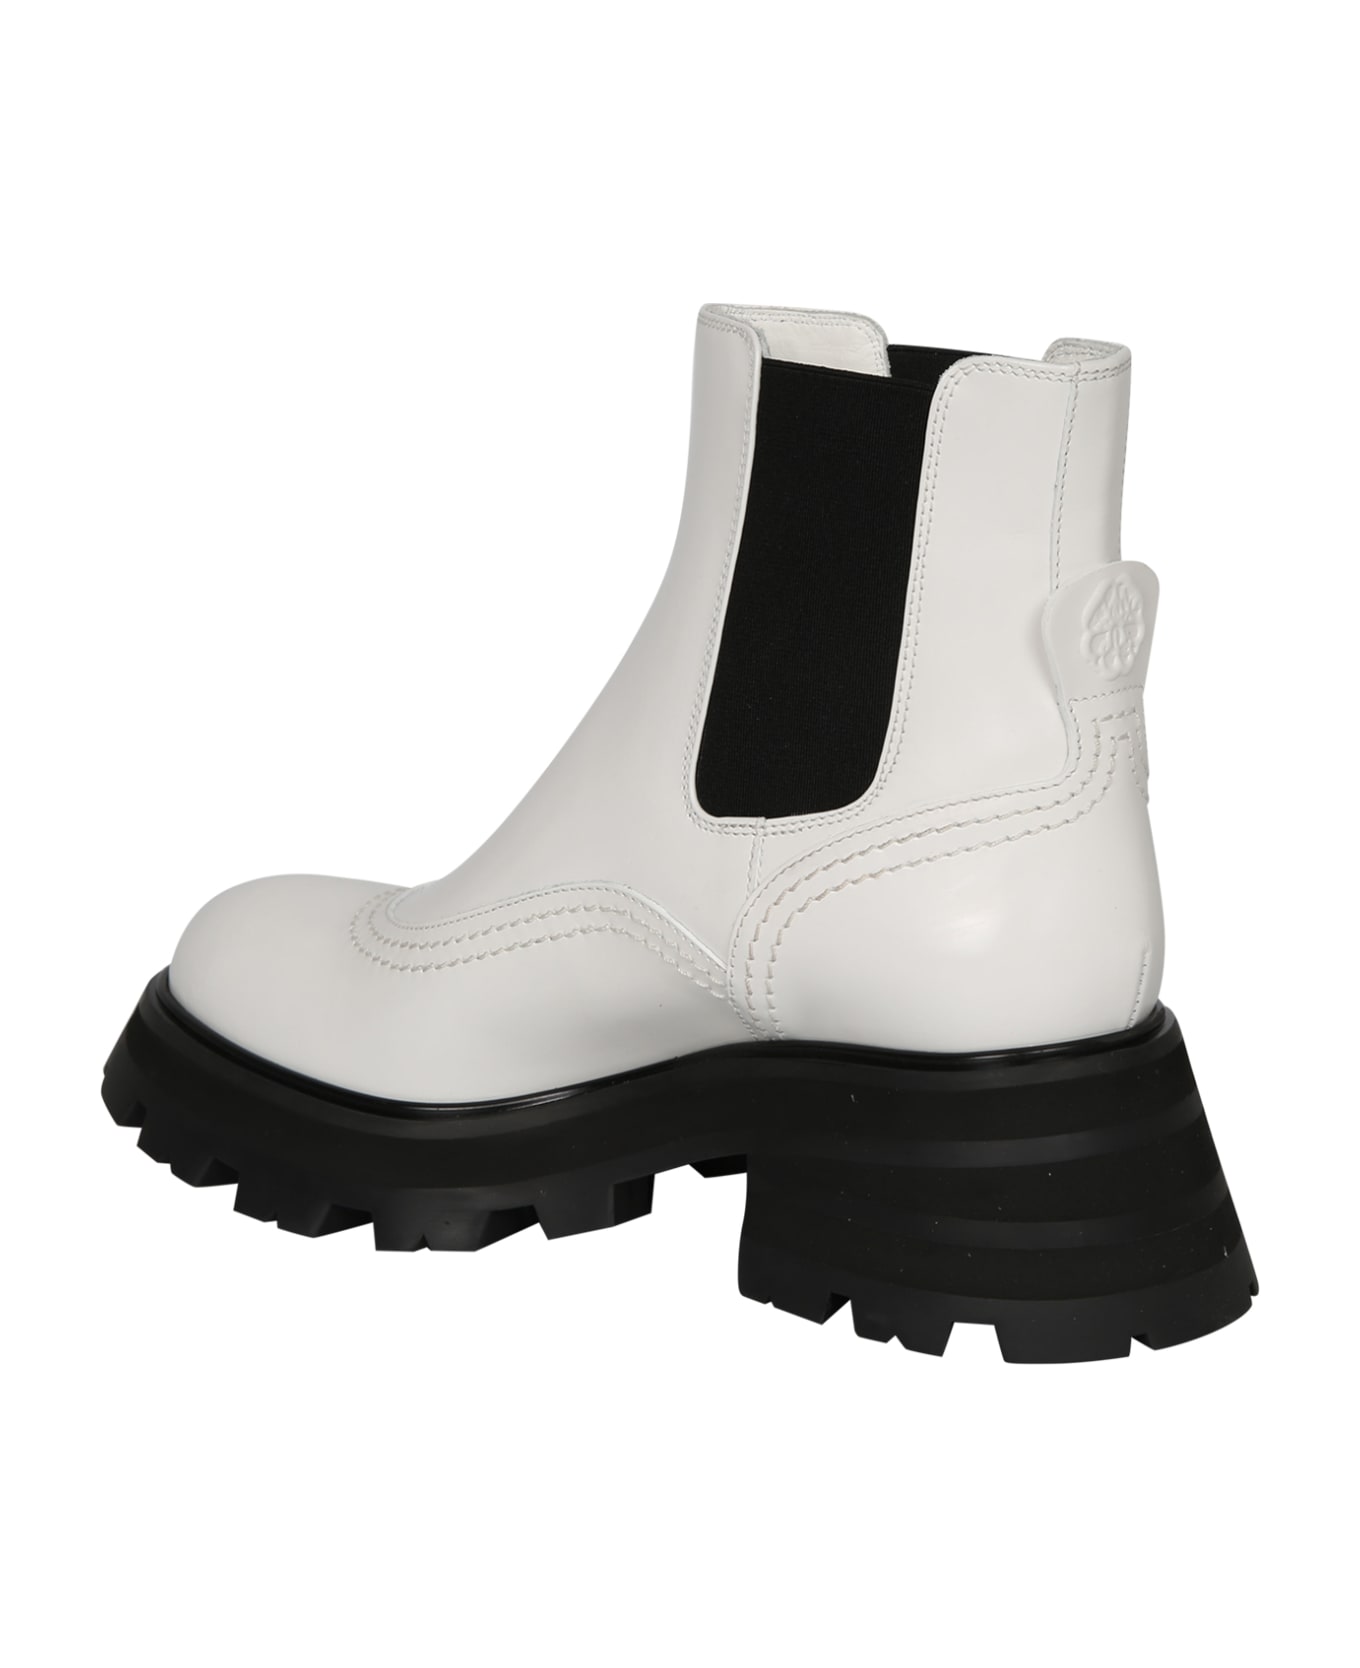 Alexander McQueen Ankle Boots - White